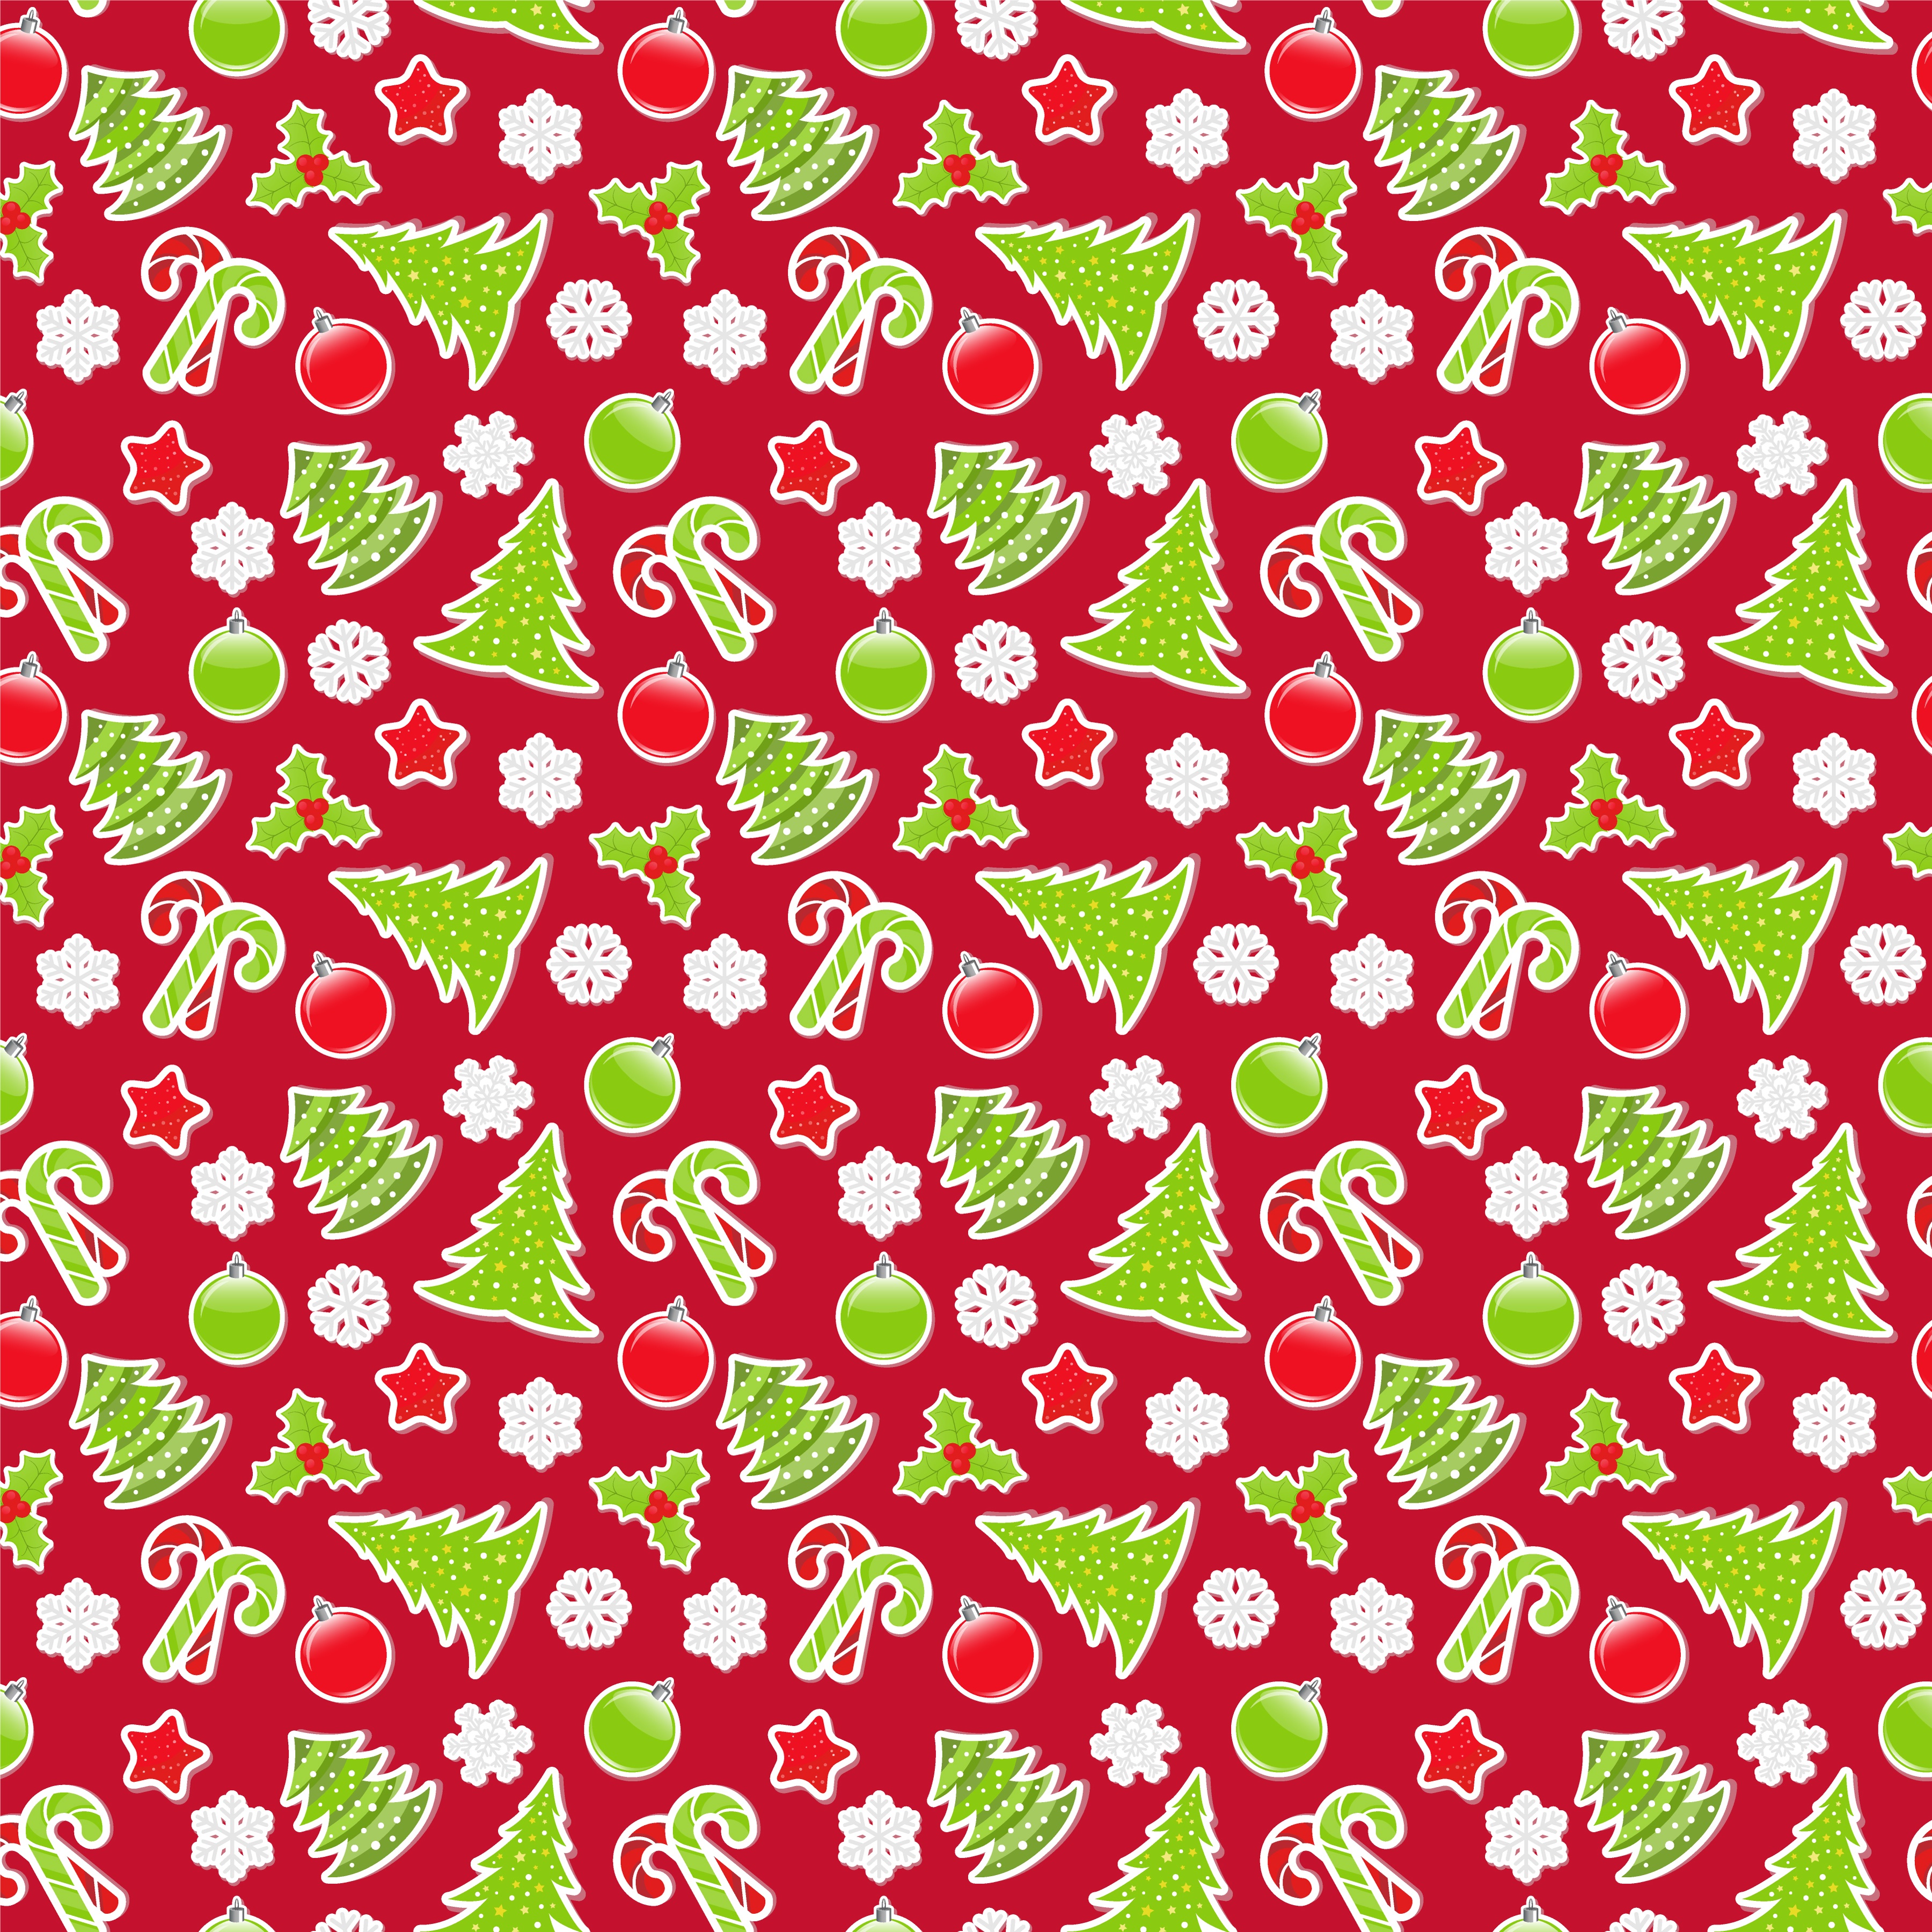 pattern, new year, bright, texture, textures, christmas, colorful, colourful, festive FHD, 4K, UHD